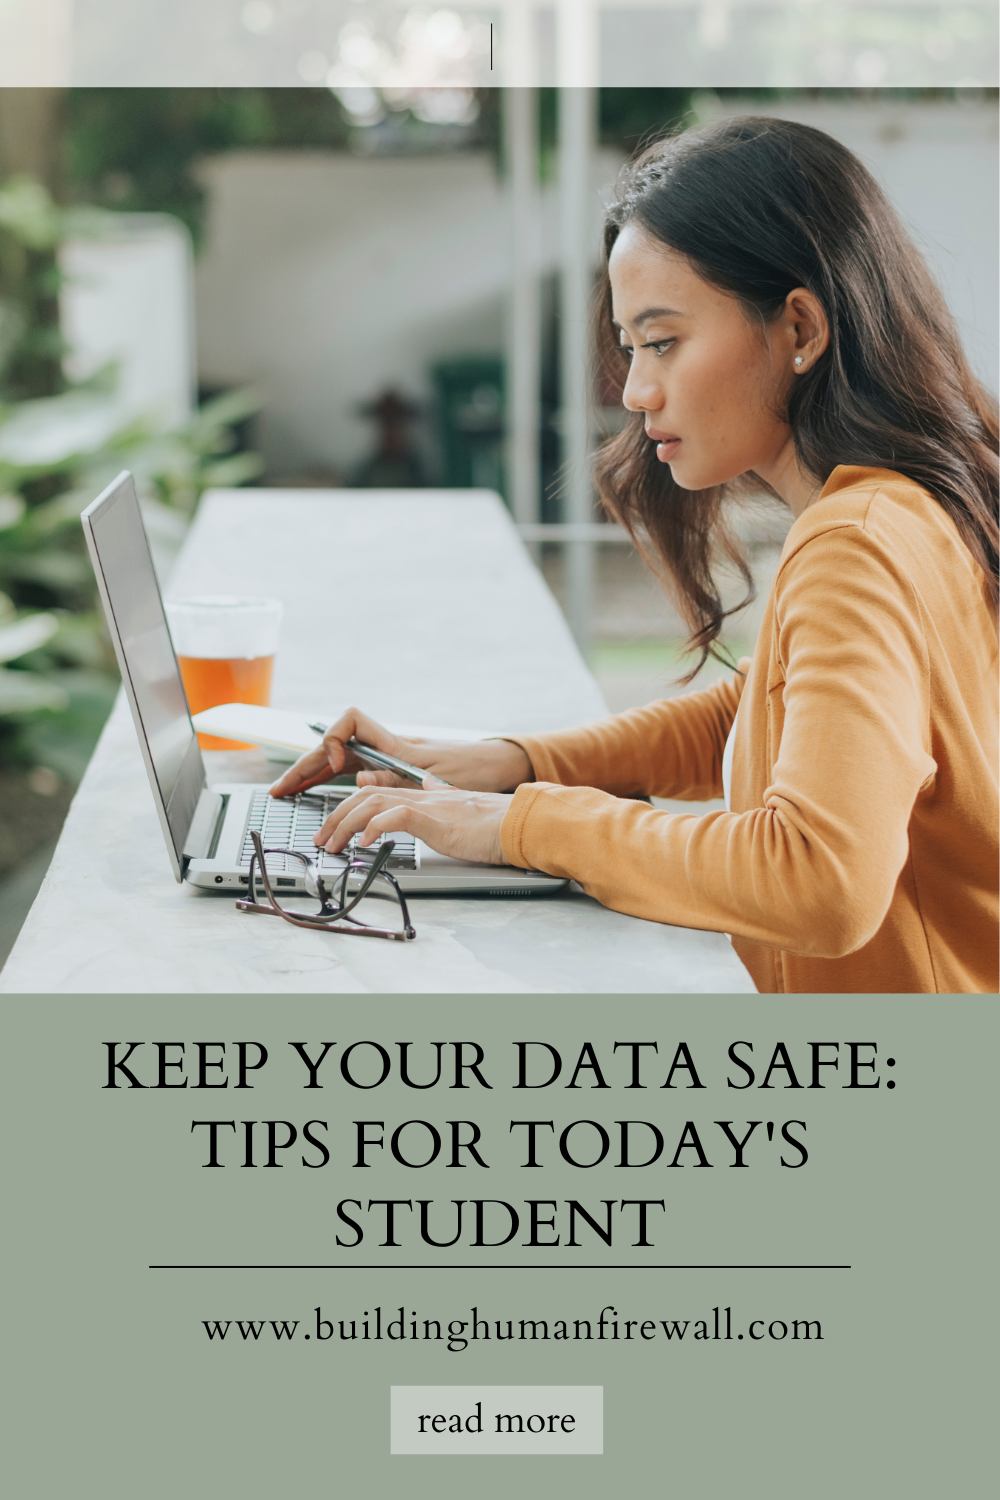 Keep Your Data Safe: Tips For Today's Student